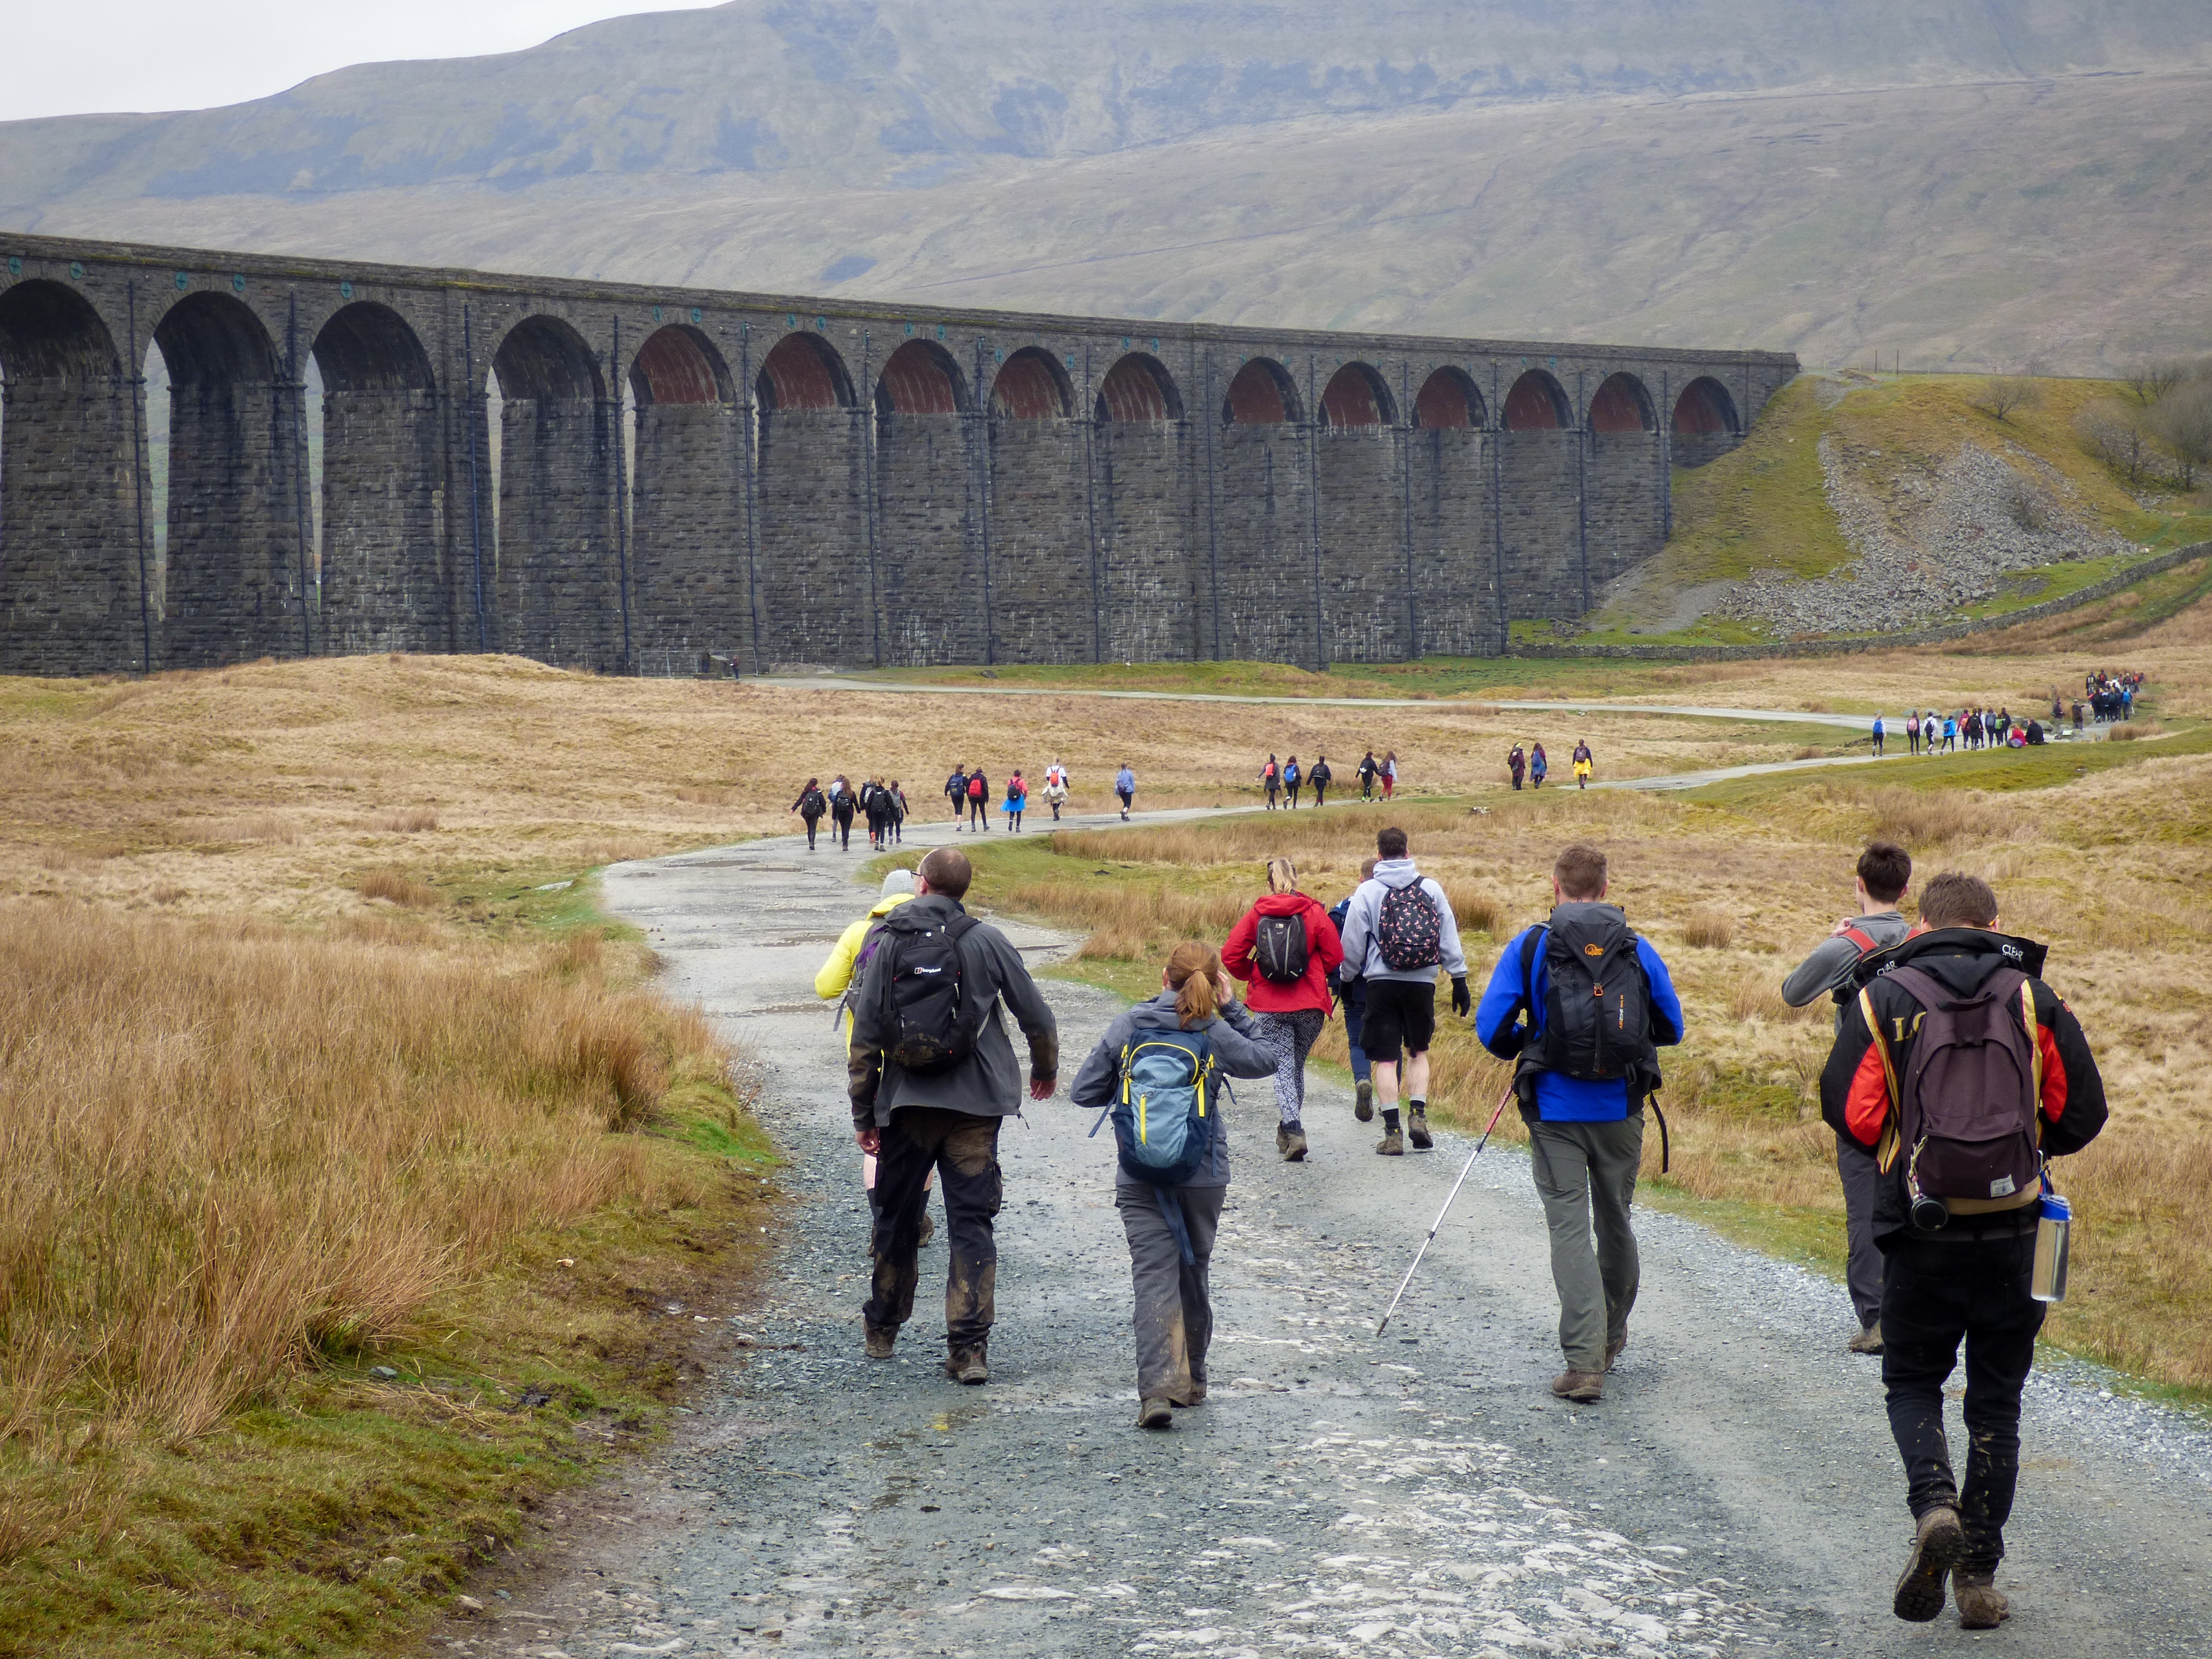 Ribblehead Viaduct in background, walkers in foreground